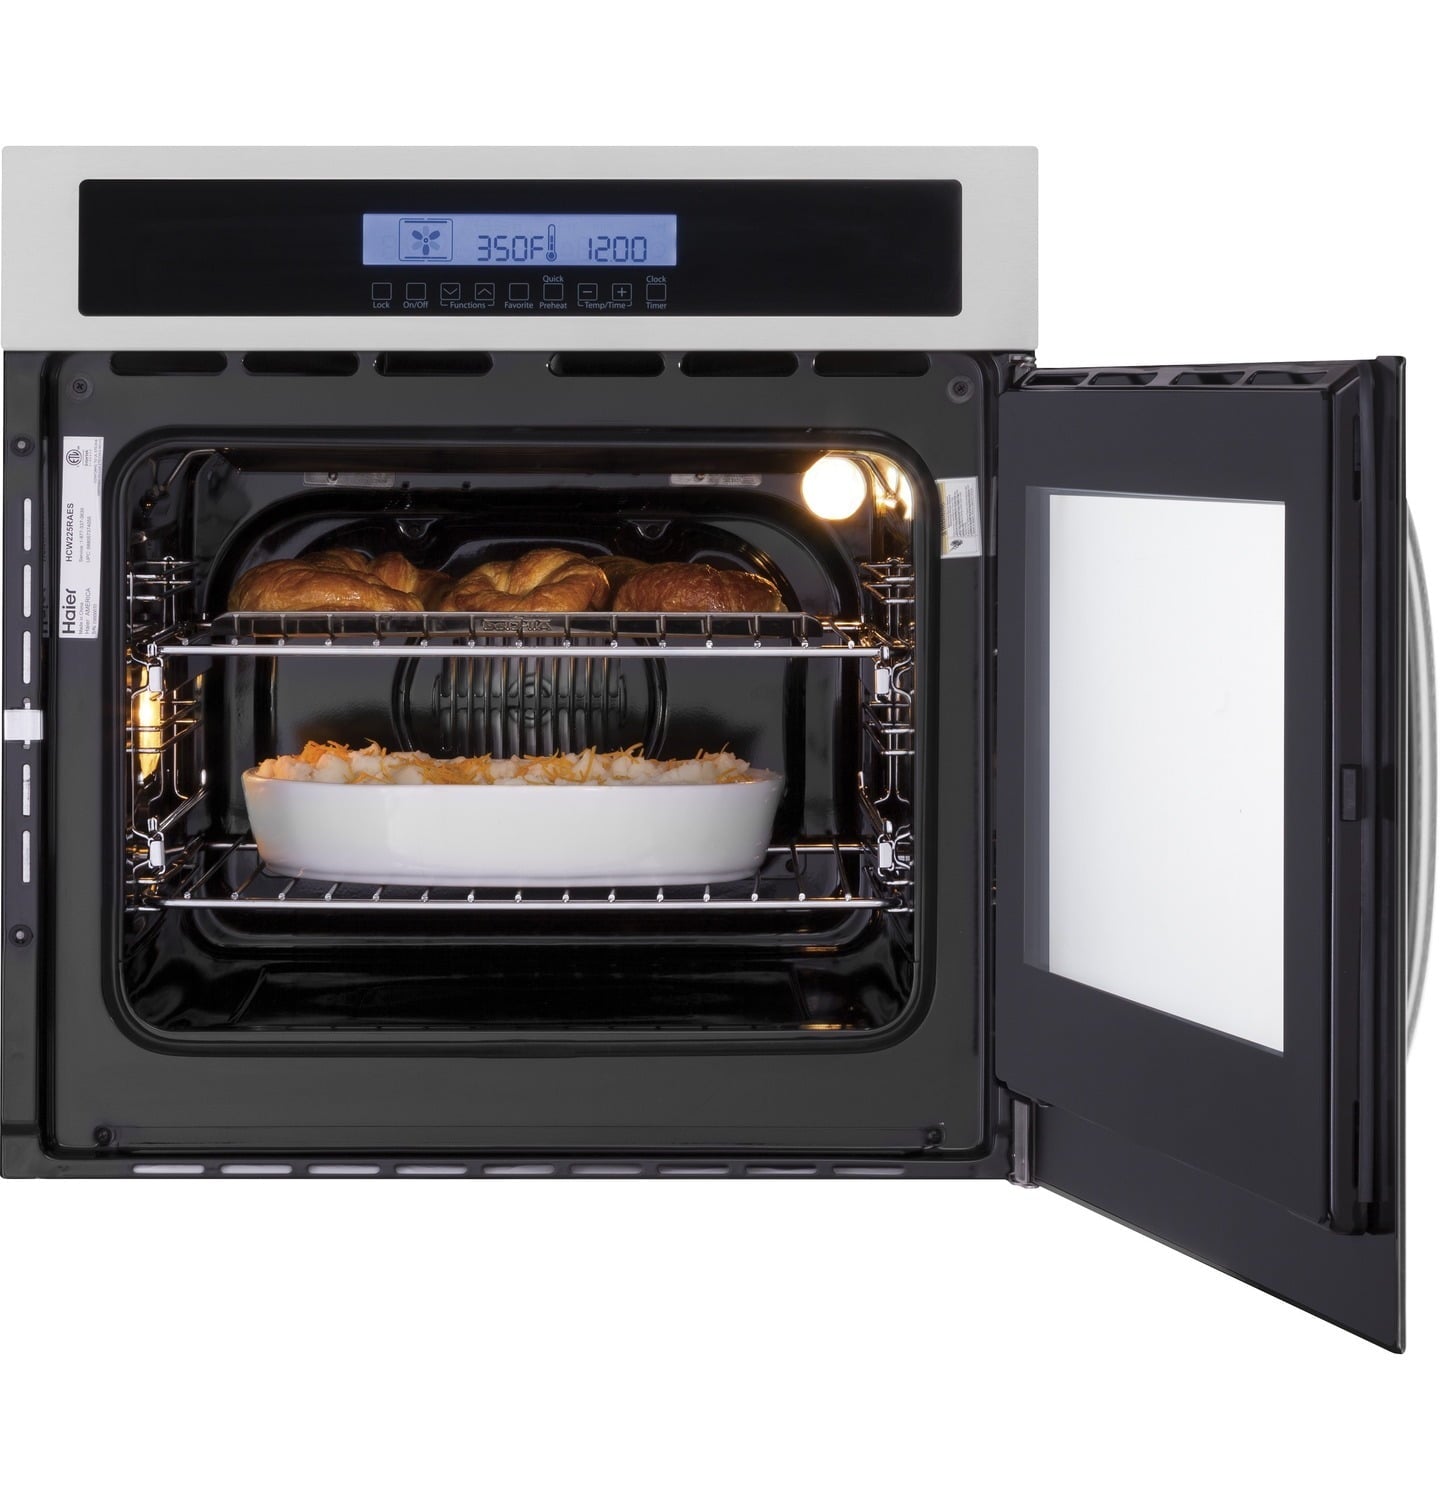 Haier HCW225RAES 24" Single 2.0 Cu. Ft. Right-Swing True European Convection Oven